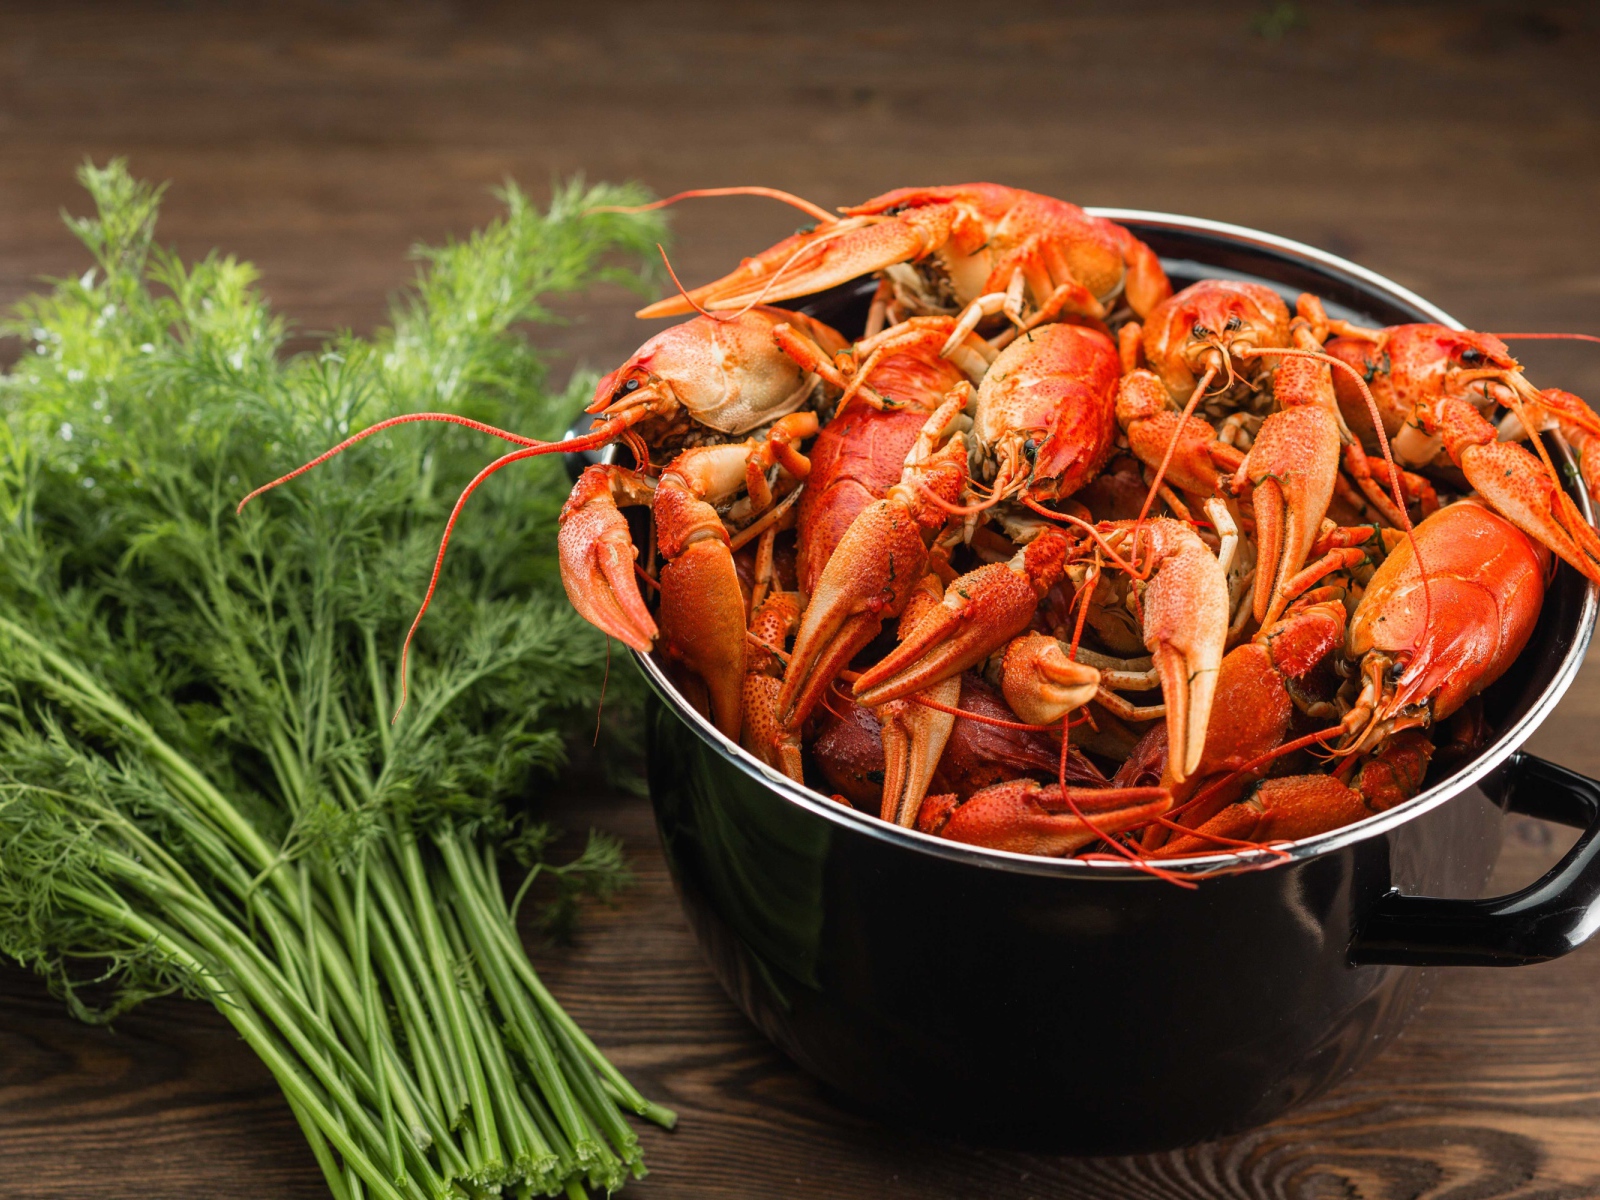 Boiled crayfish in a pan on the table with dill